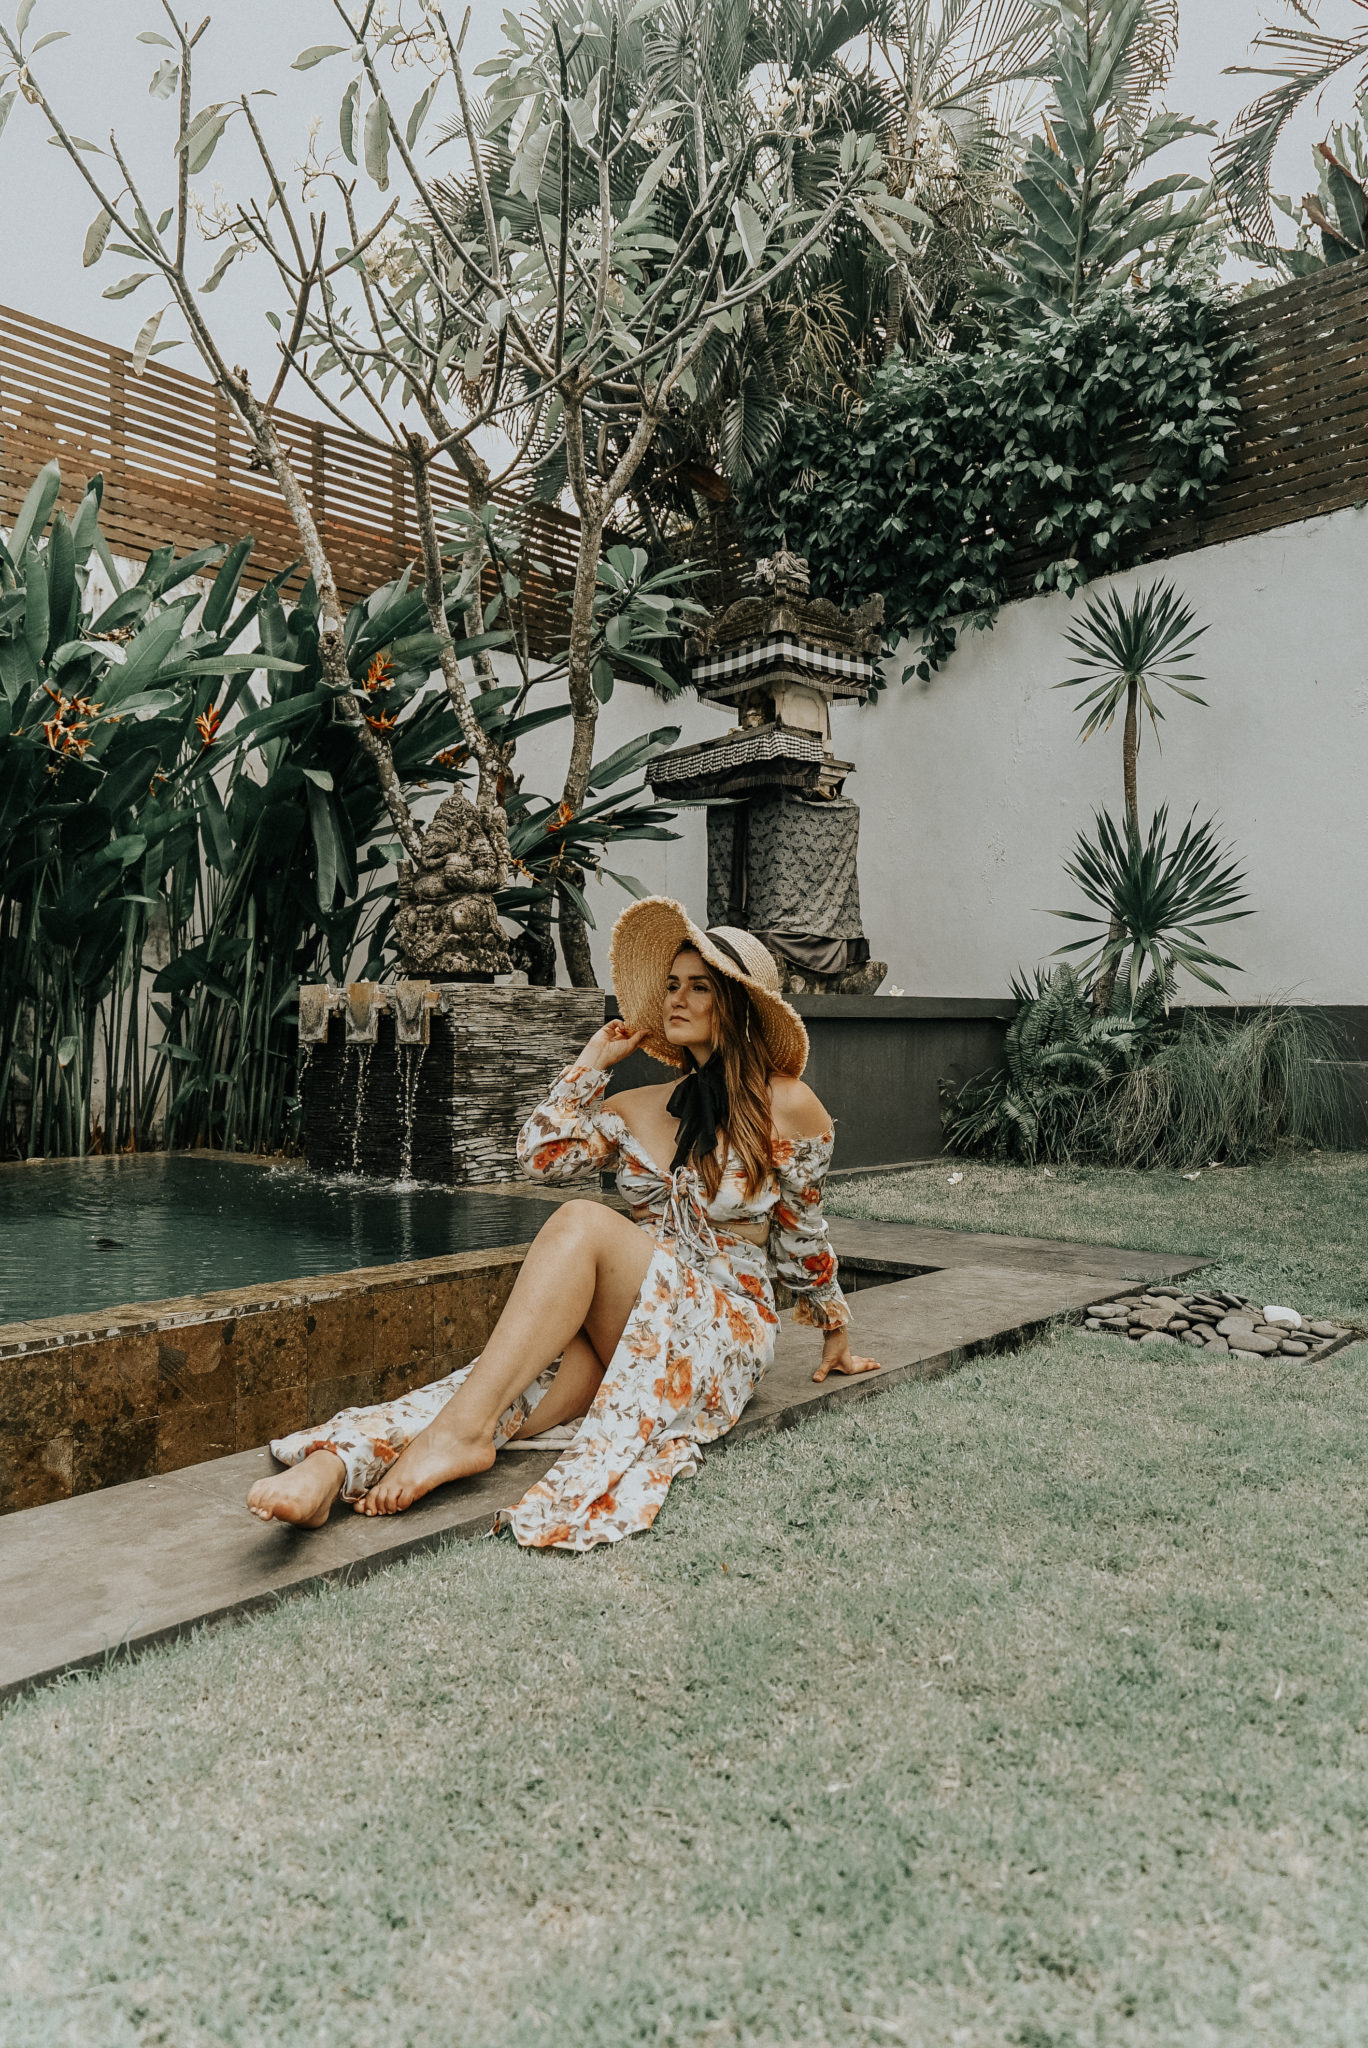 Where to Stay in Bali